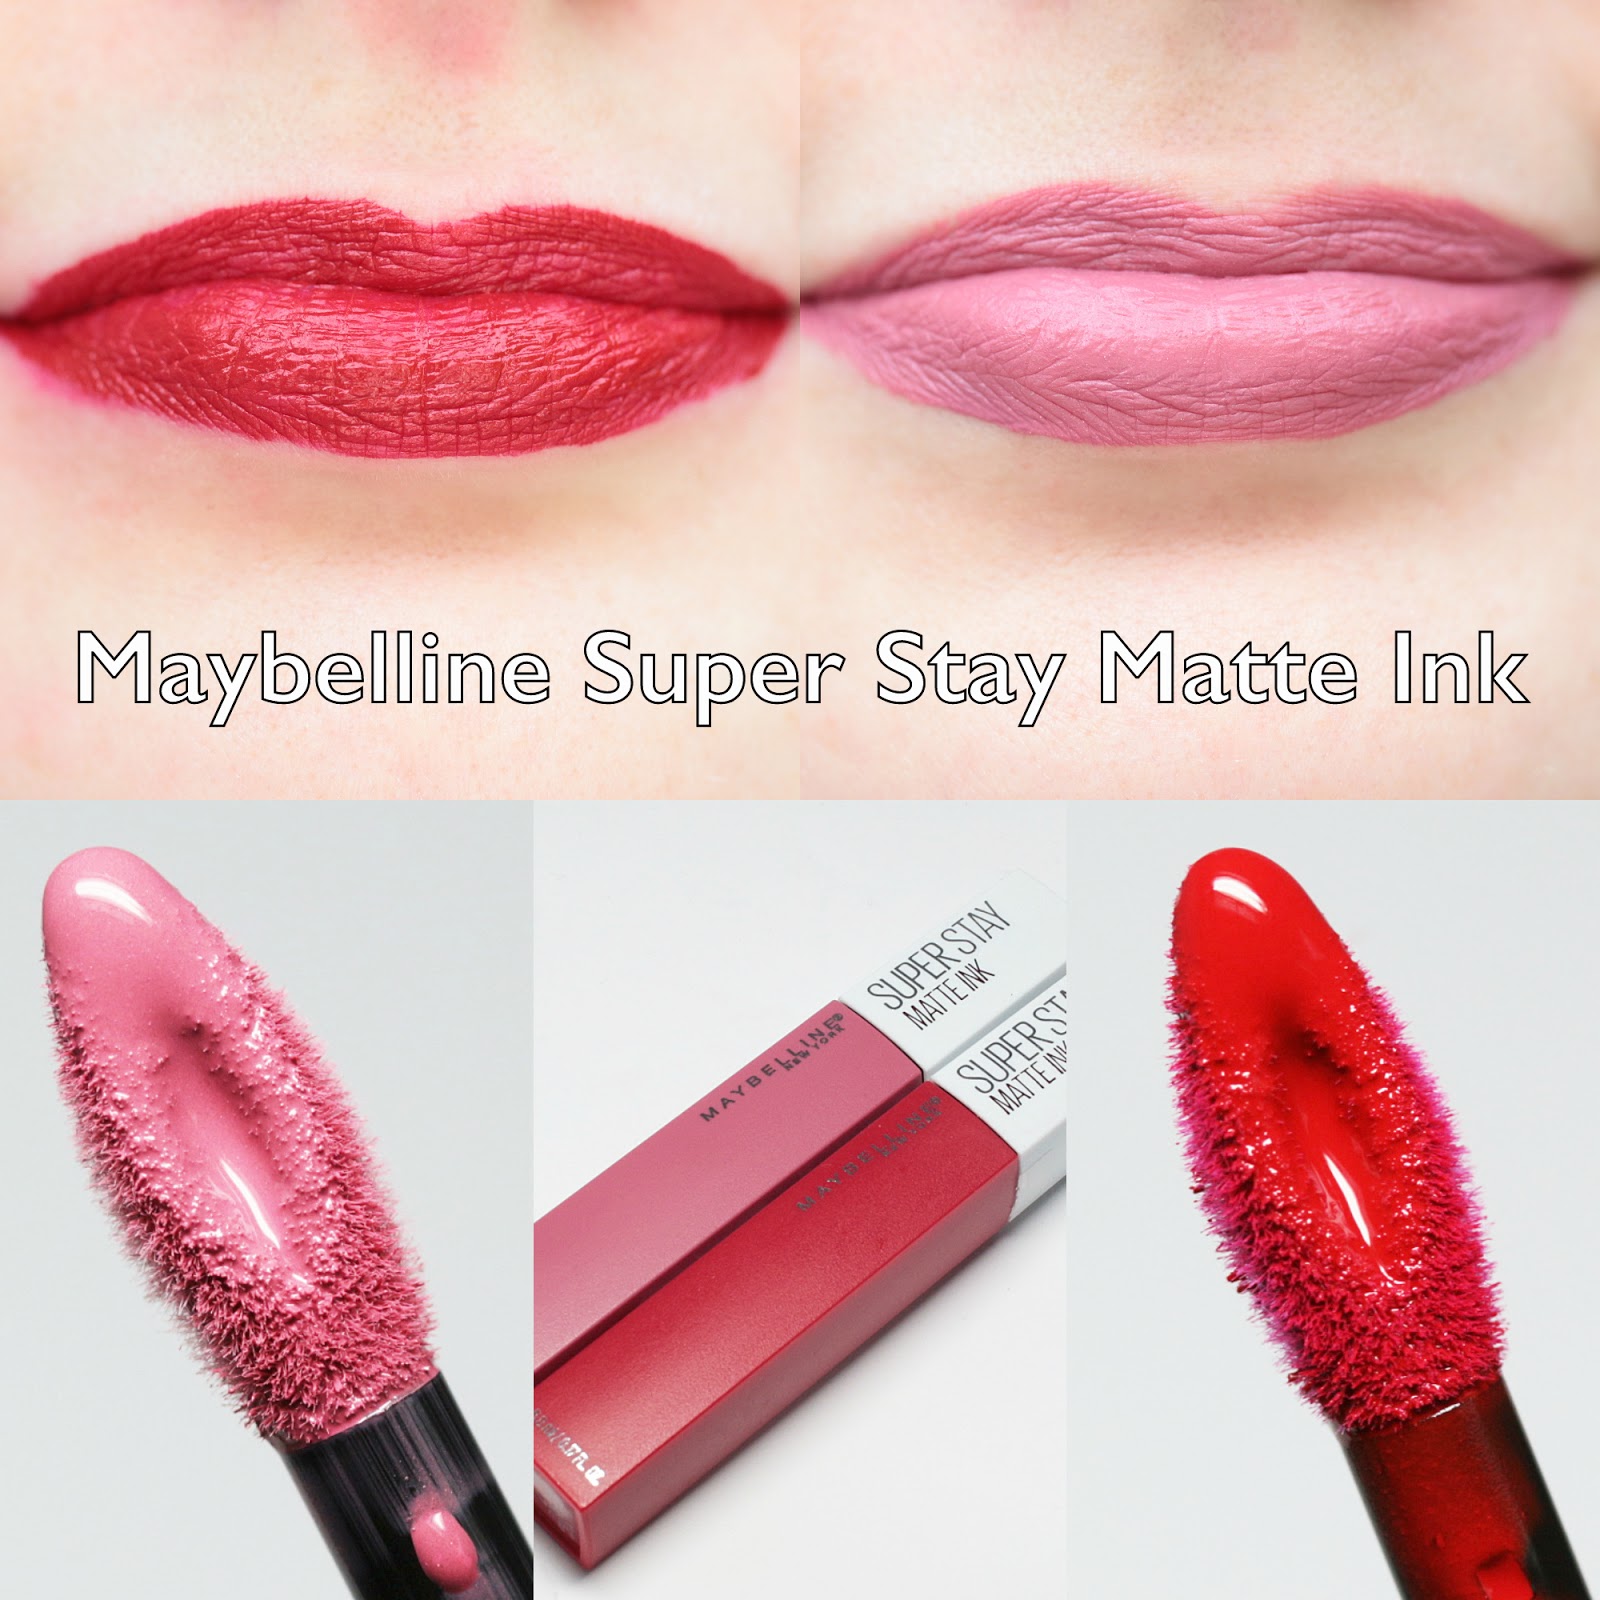 mezelf mixer wang The Polished Hippy: Maybelline Super Stay Matte Ink Liquid Lipstick Swatches  and Review